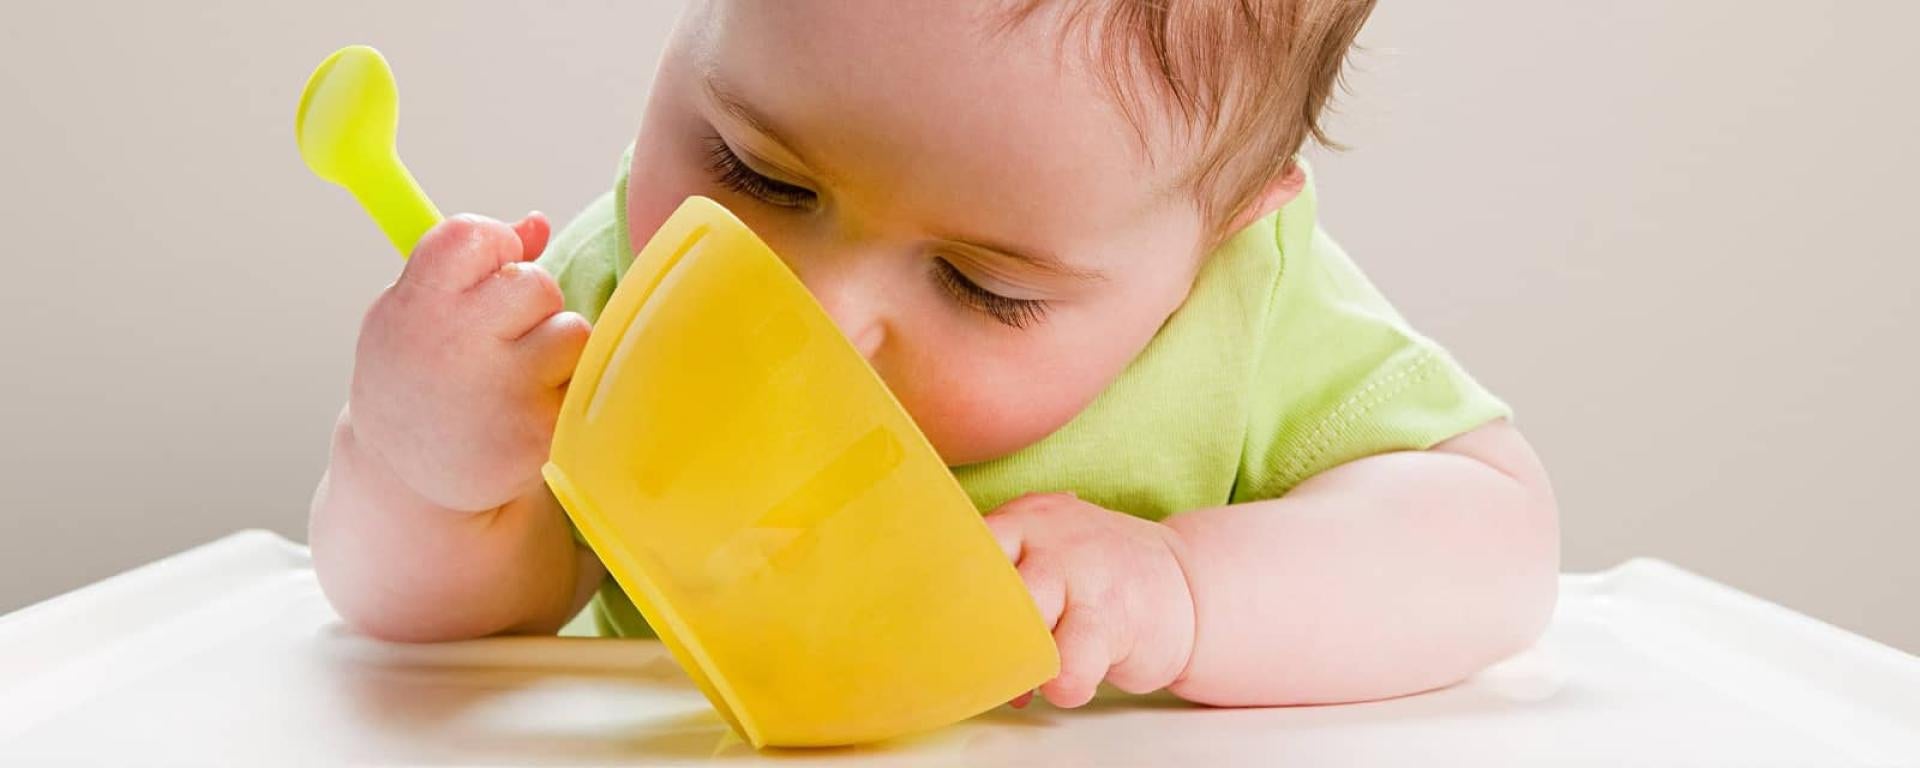 Baby using bowl and spoon